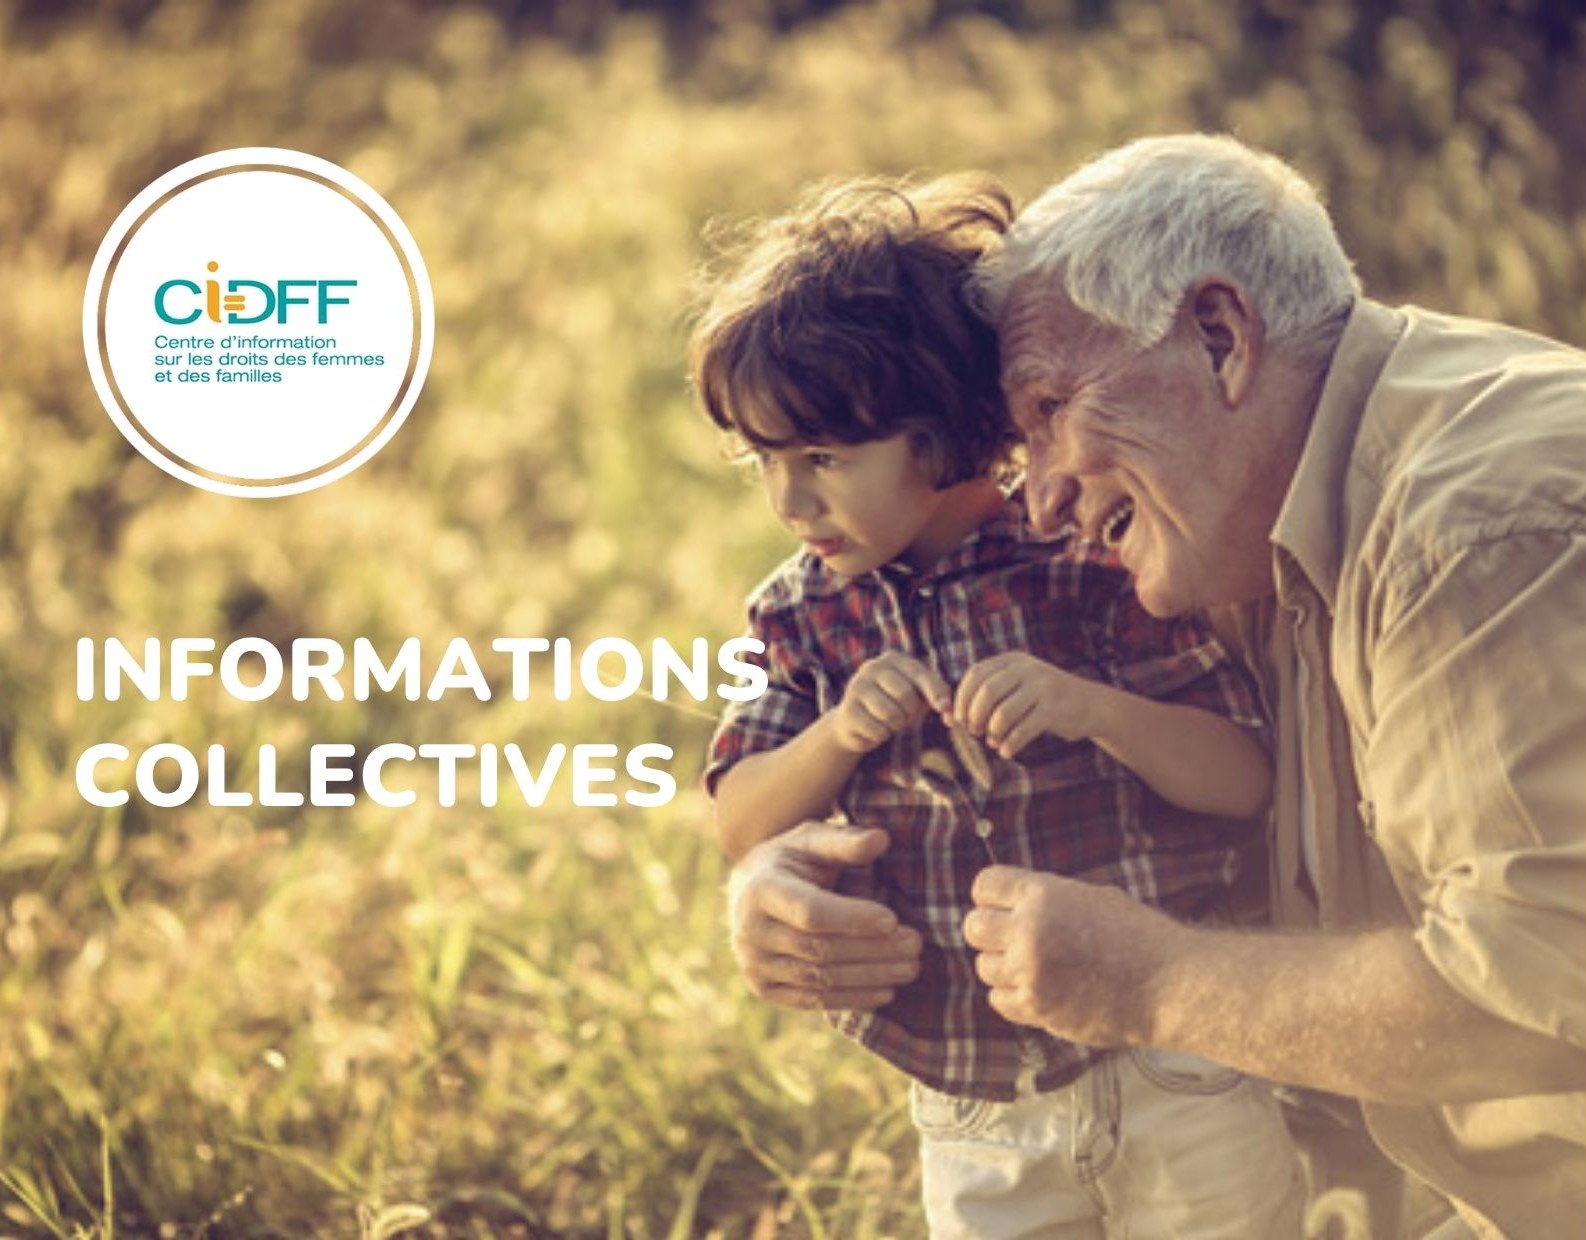 CIDFF : INFORMATIONS COLLECTIVES